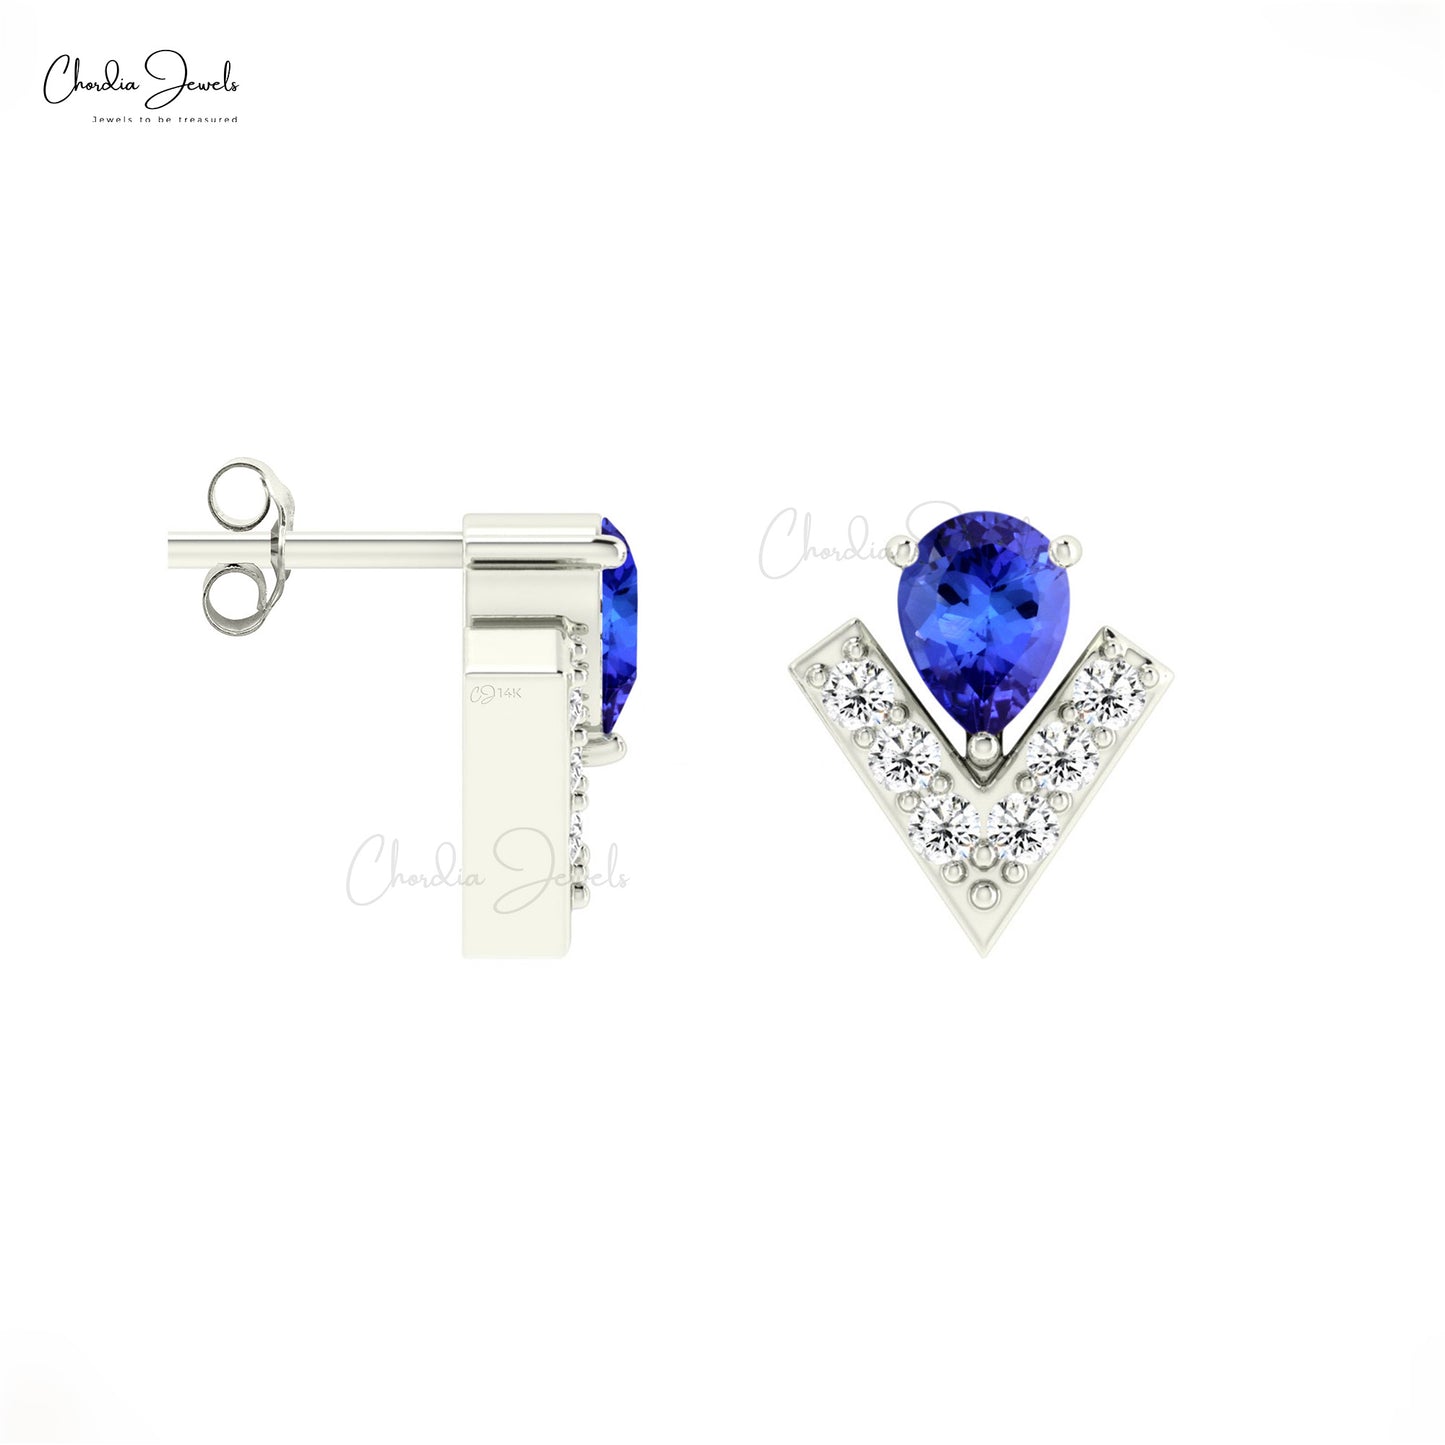 Pear-Cut Tanzanite V-Shape Earrings Diamond Accented 14k Gold Studs For Birthday Gift